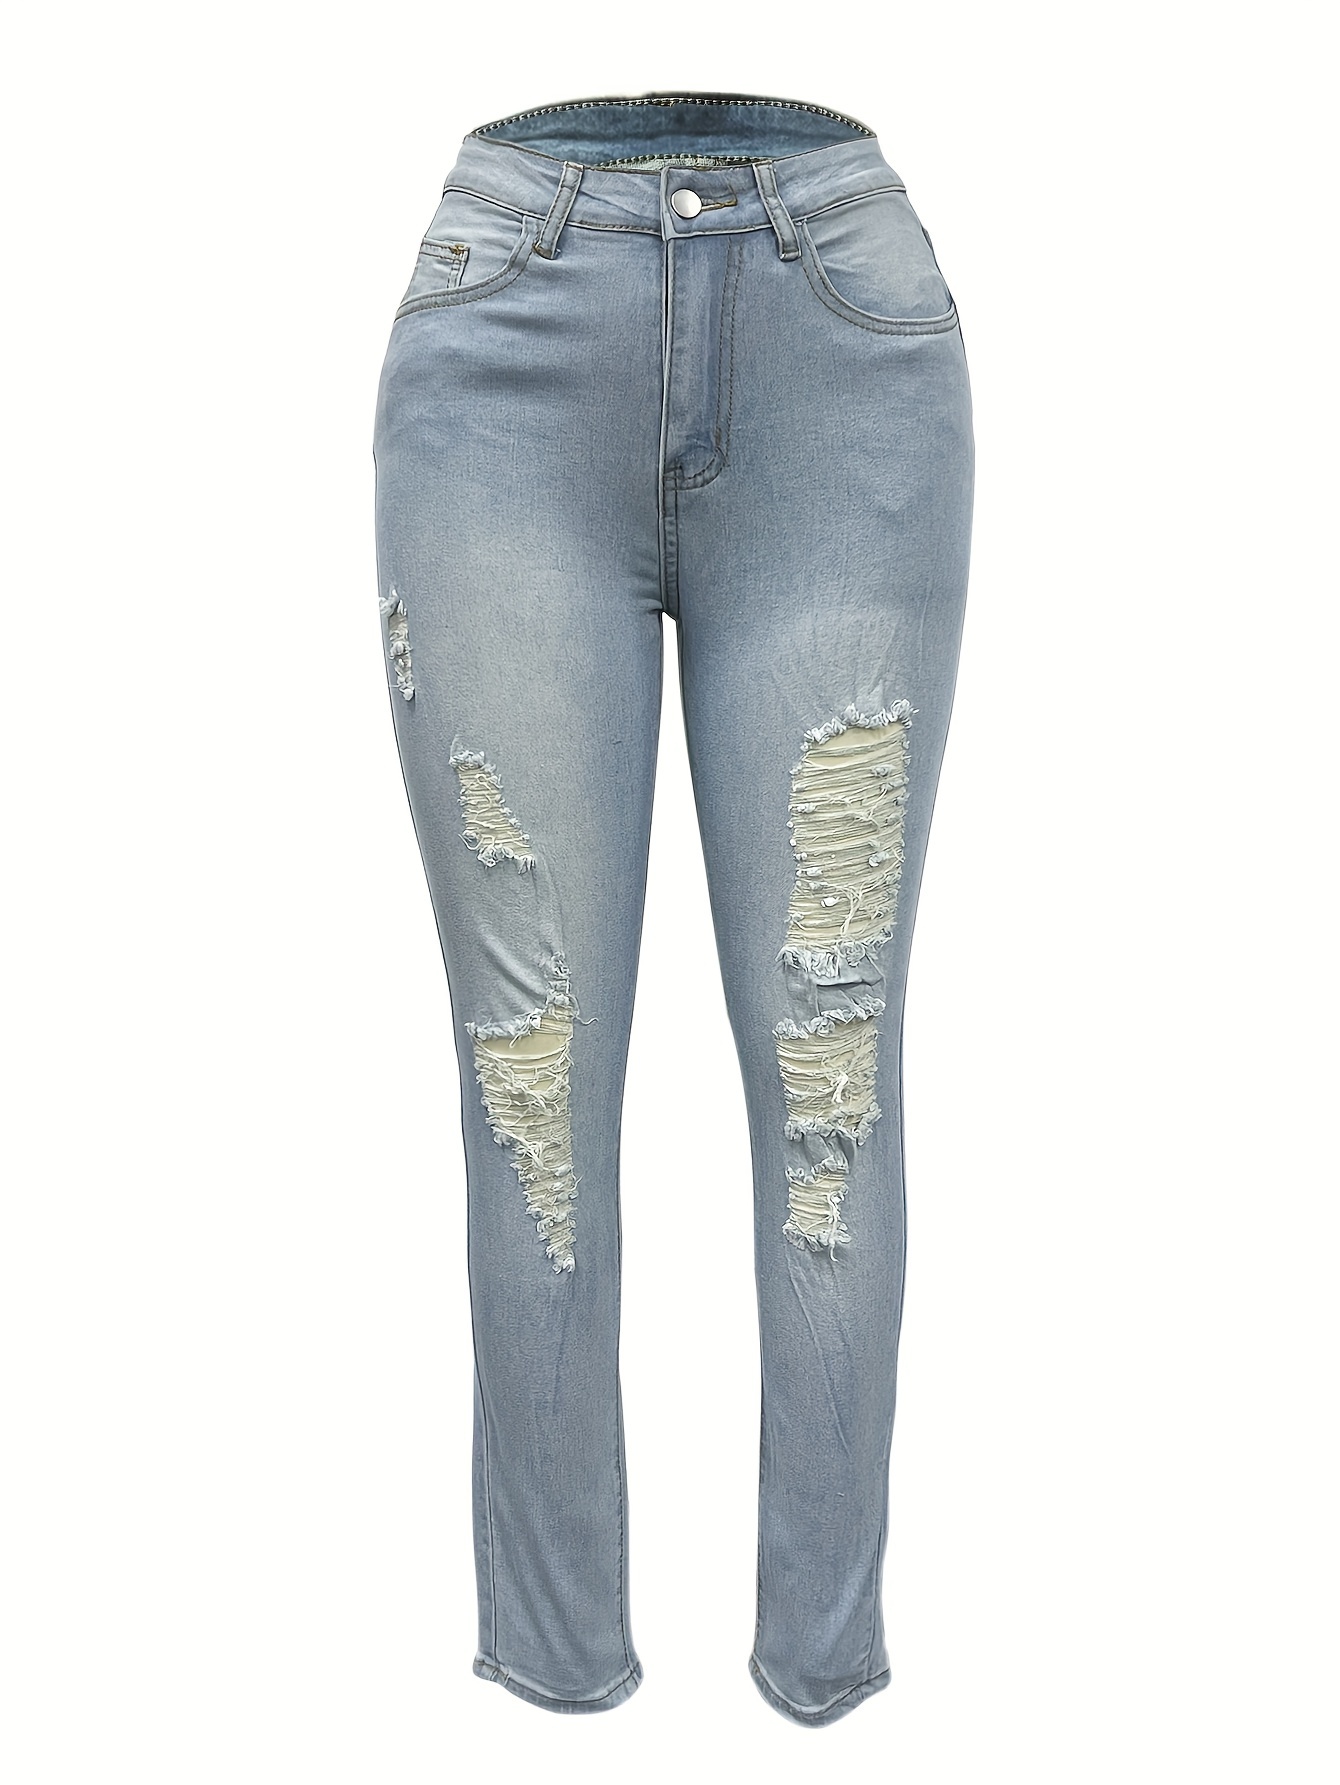 Double Button Ripped Skinny Jeans, High * Washed Blue Stretchy Denim Pants,  Women's Denim Jeans & Clothing